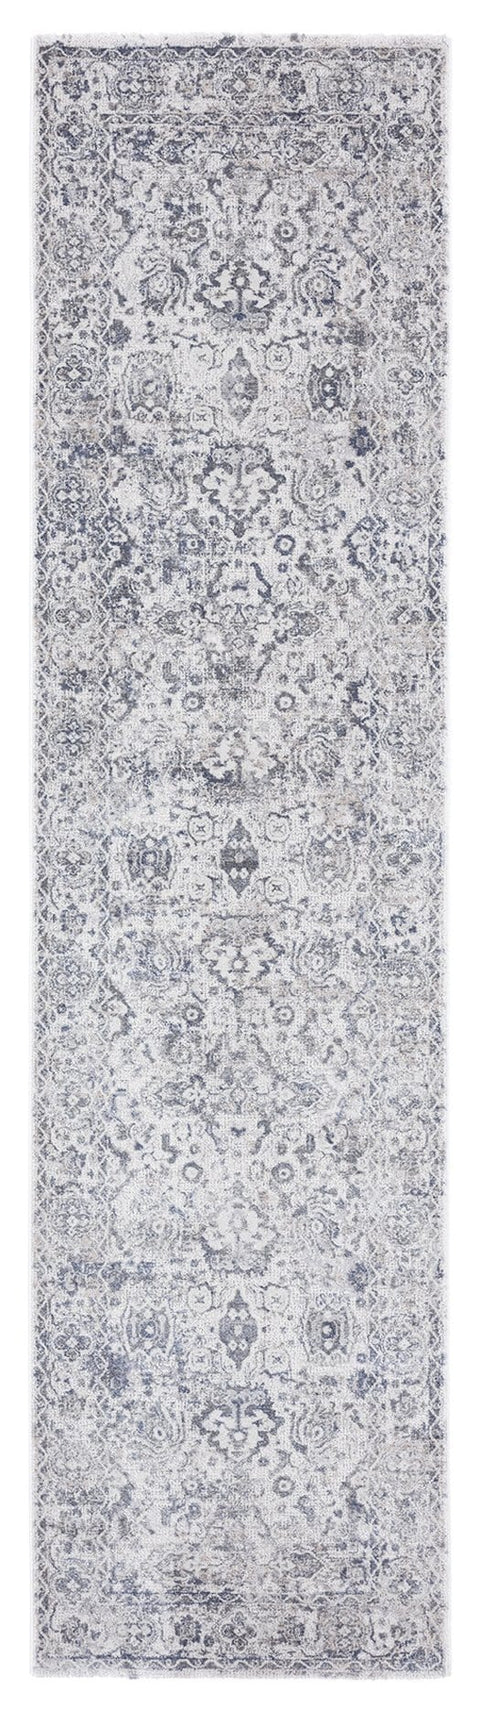 Iman Blue Ivory and Stone Grey Transitional Distressed Runner Rug *NO RETURNS UNLESS FAULTY